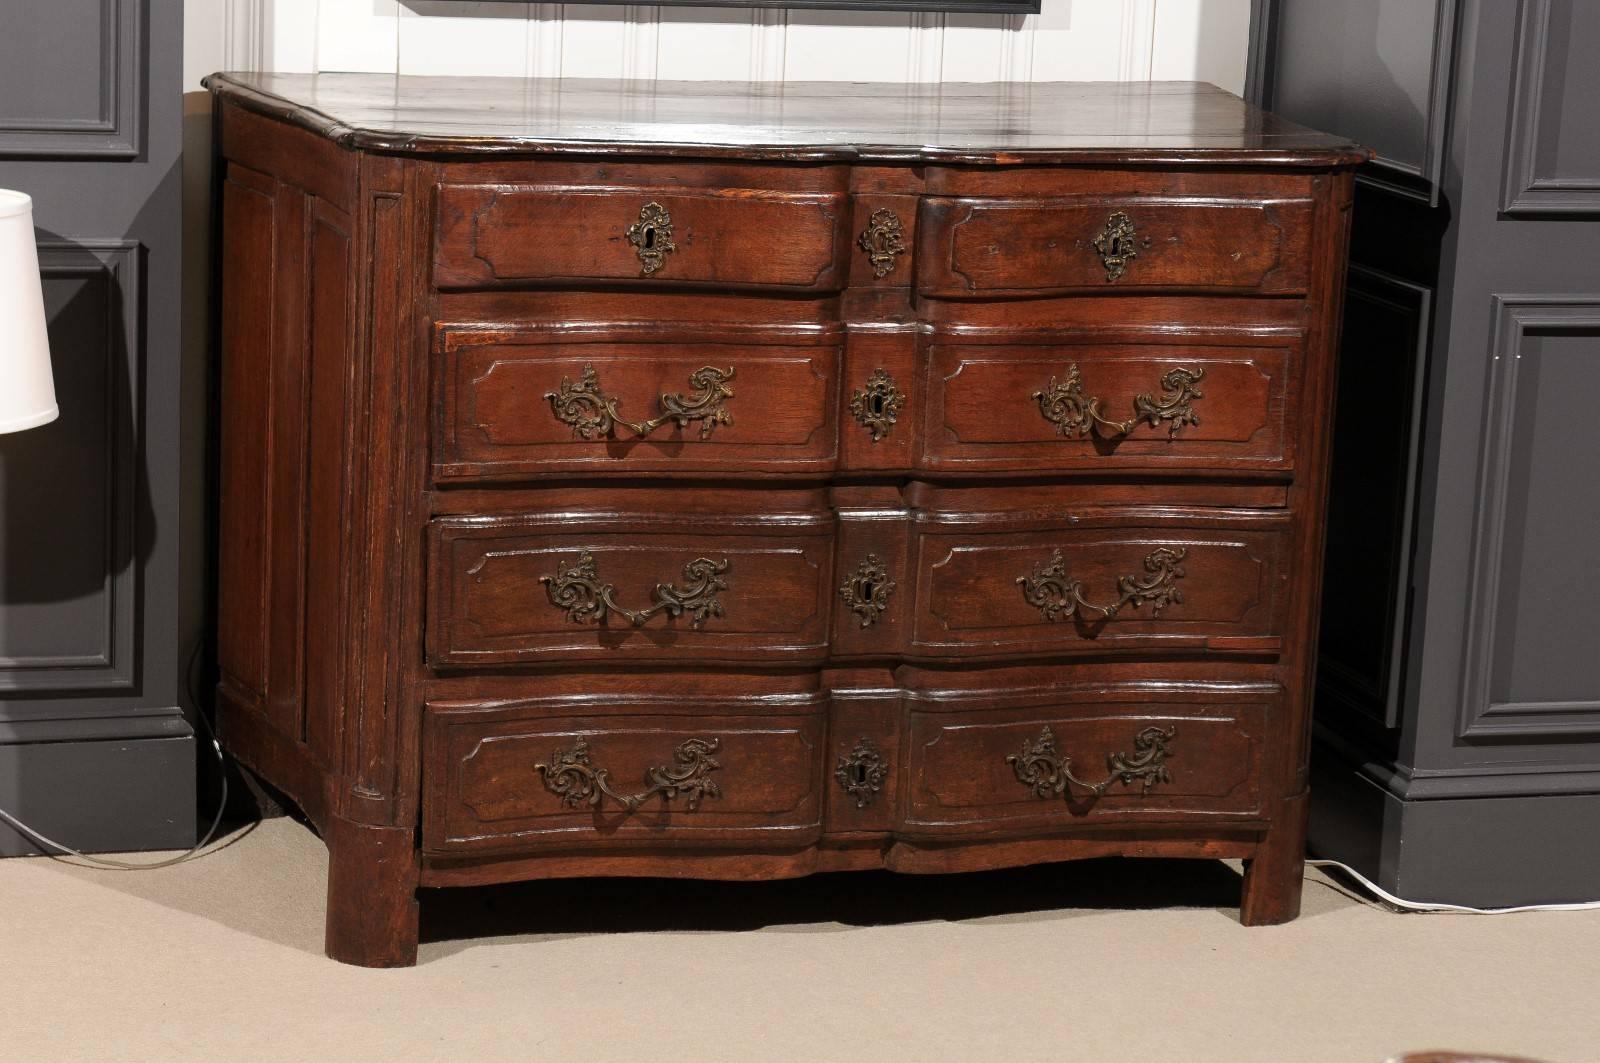 Four-drawer chest from France in walnut. Ornate, original hardware on all drawers.